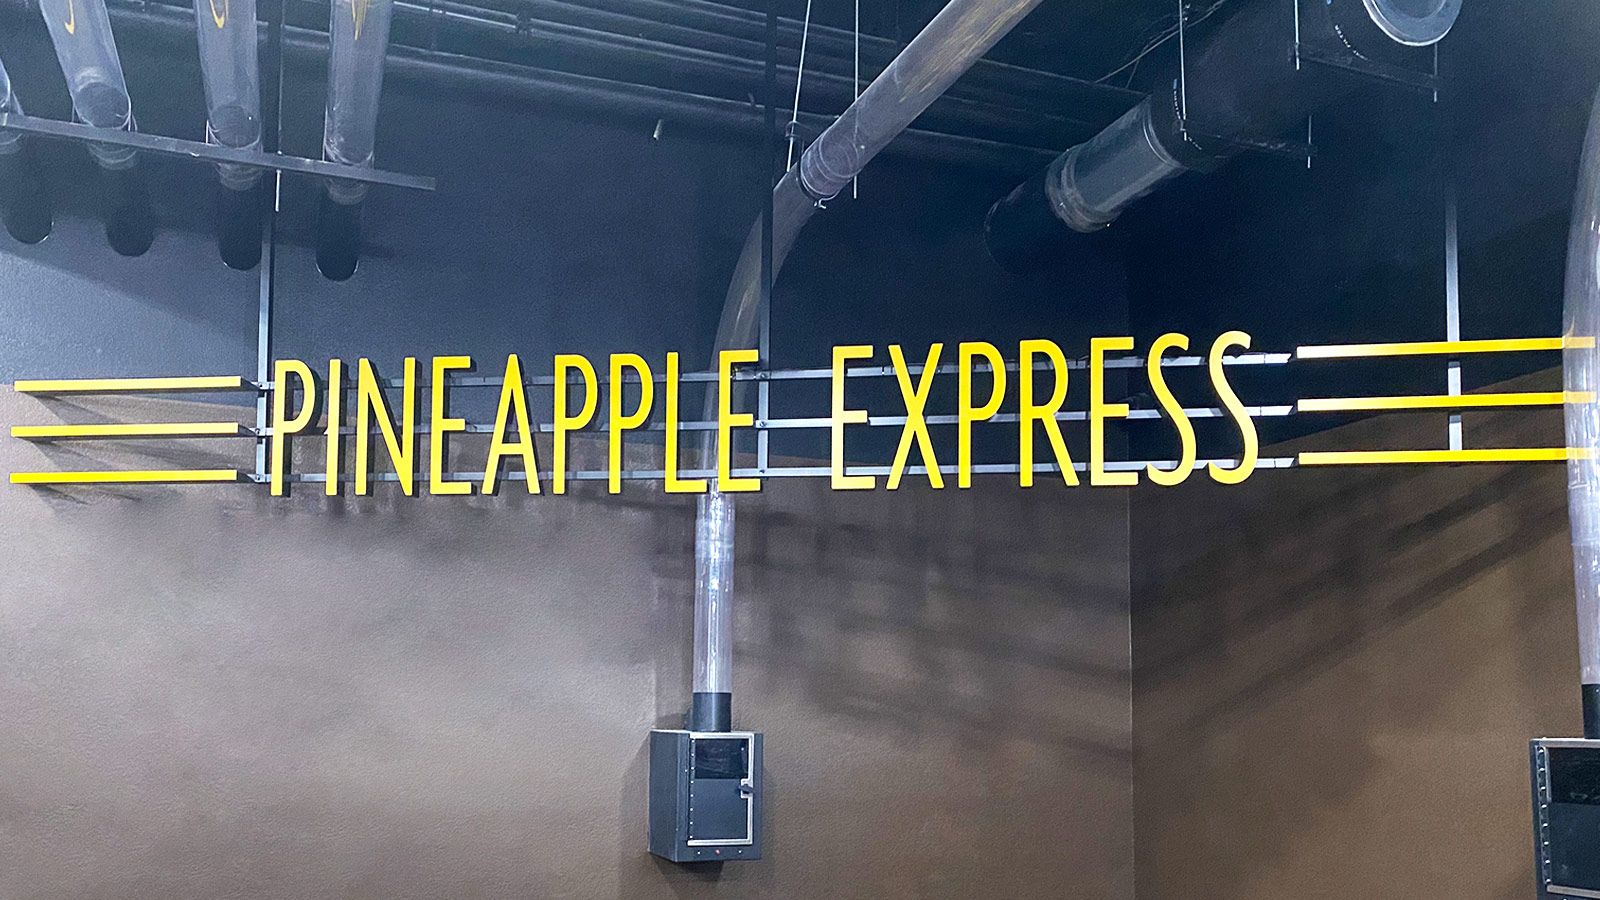 pineapple express interior channel letters